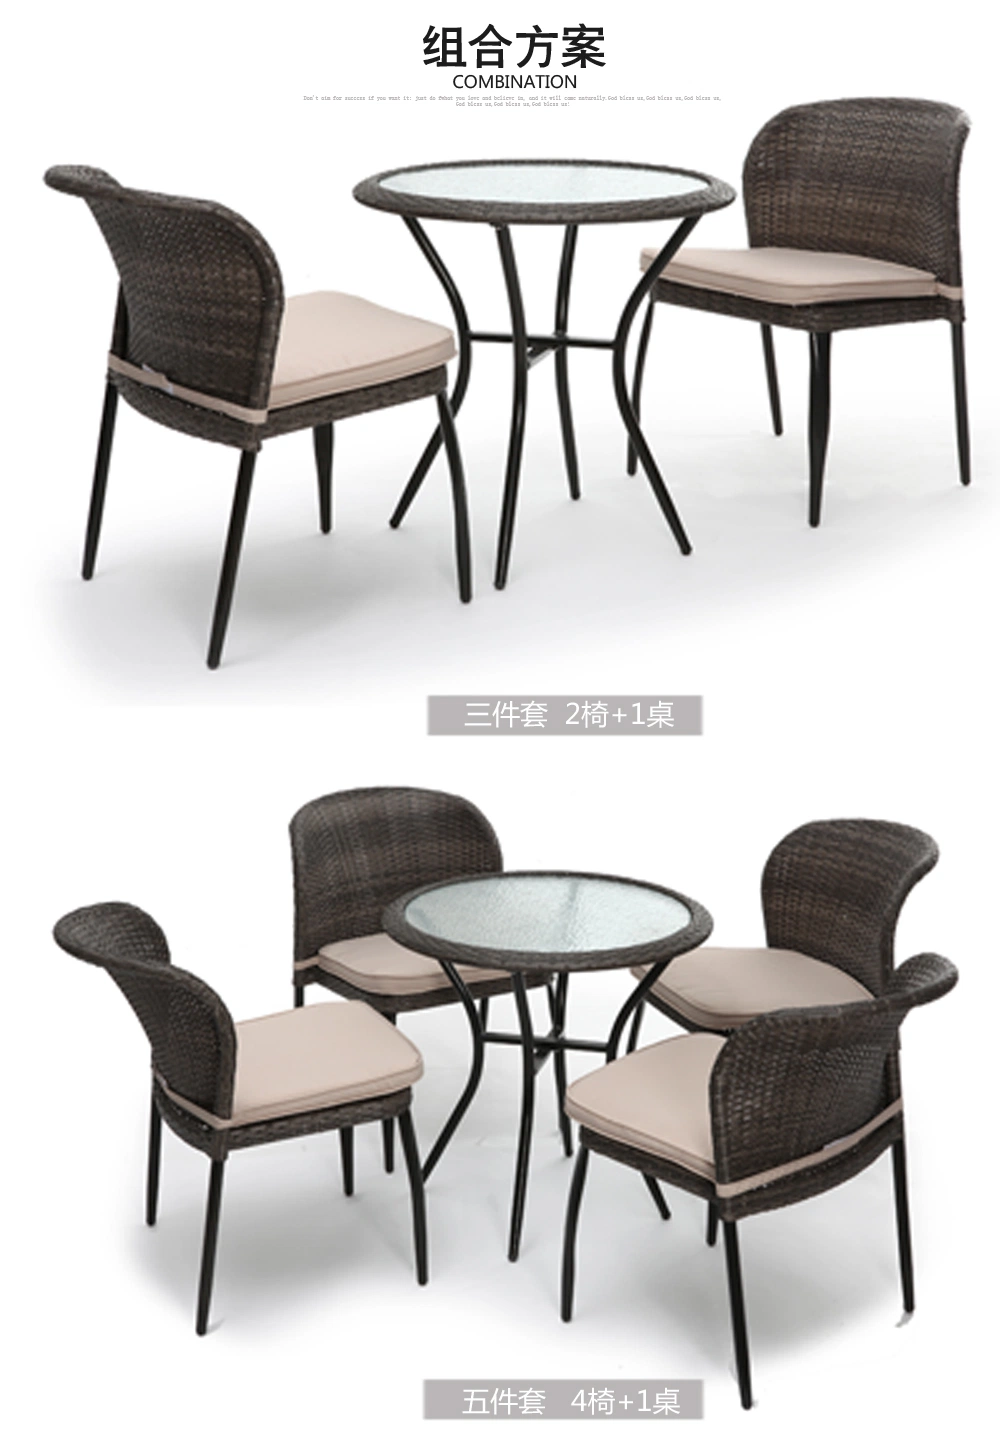 30 Years Manufacturer OEM/ODM Modern 5PCS Outdoor Wicker Dining Set Furniture for Garden Rattan with 4 Seater Dining Table Ready Stock